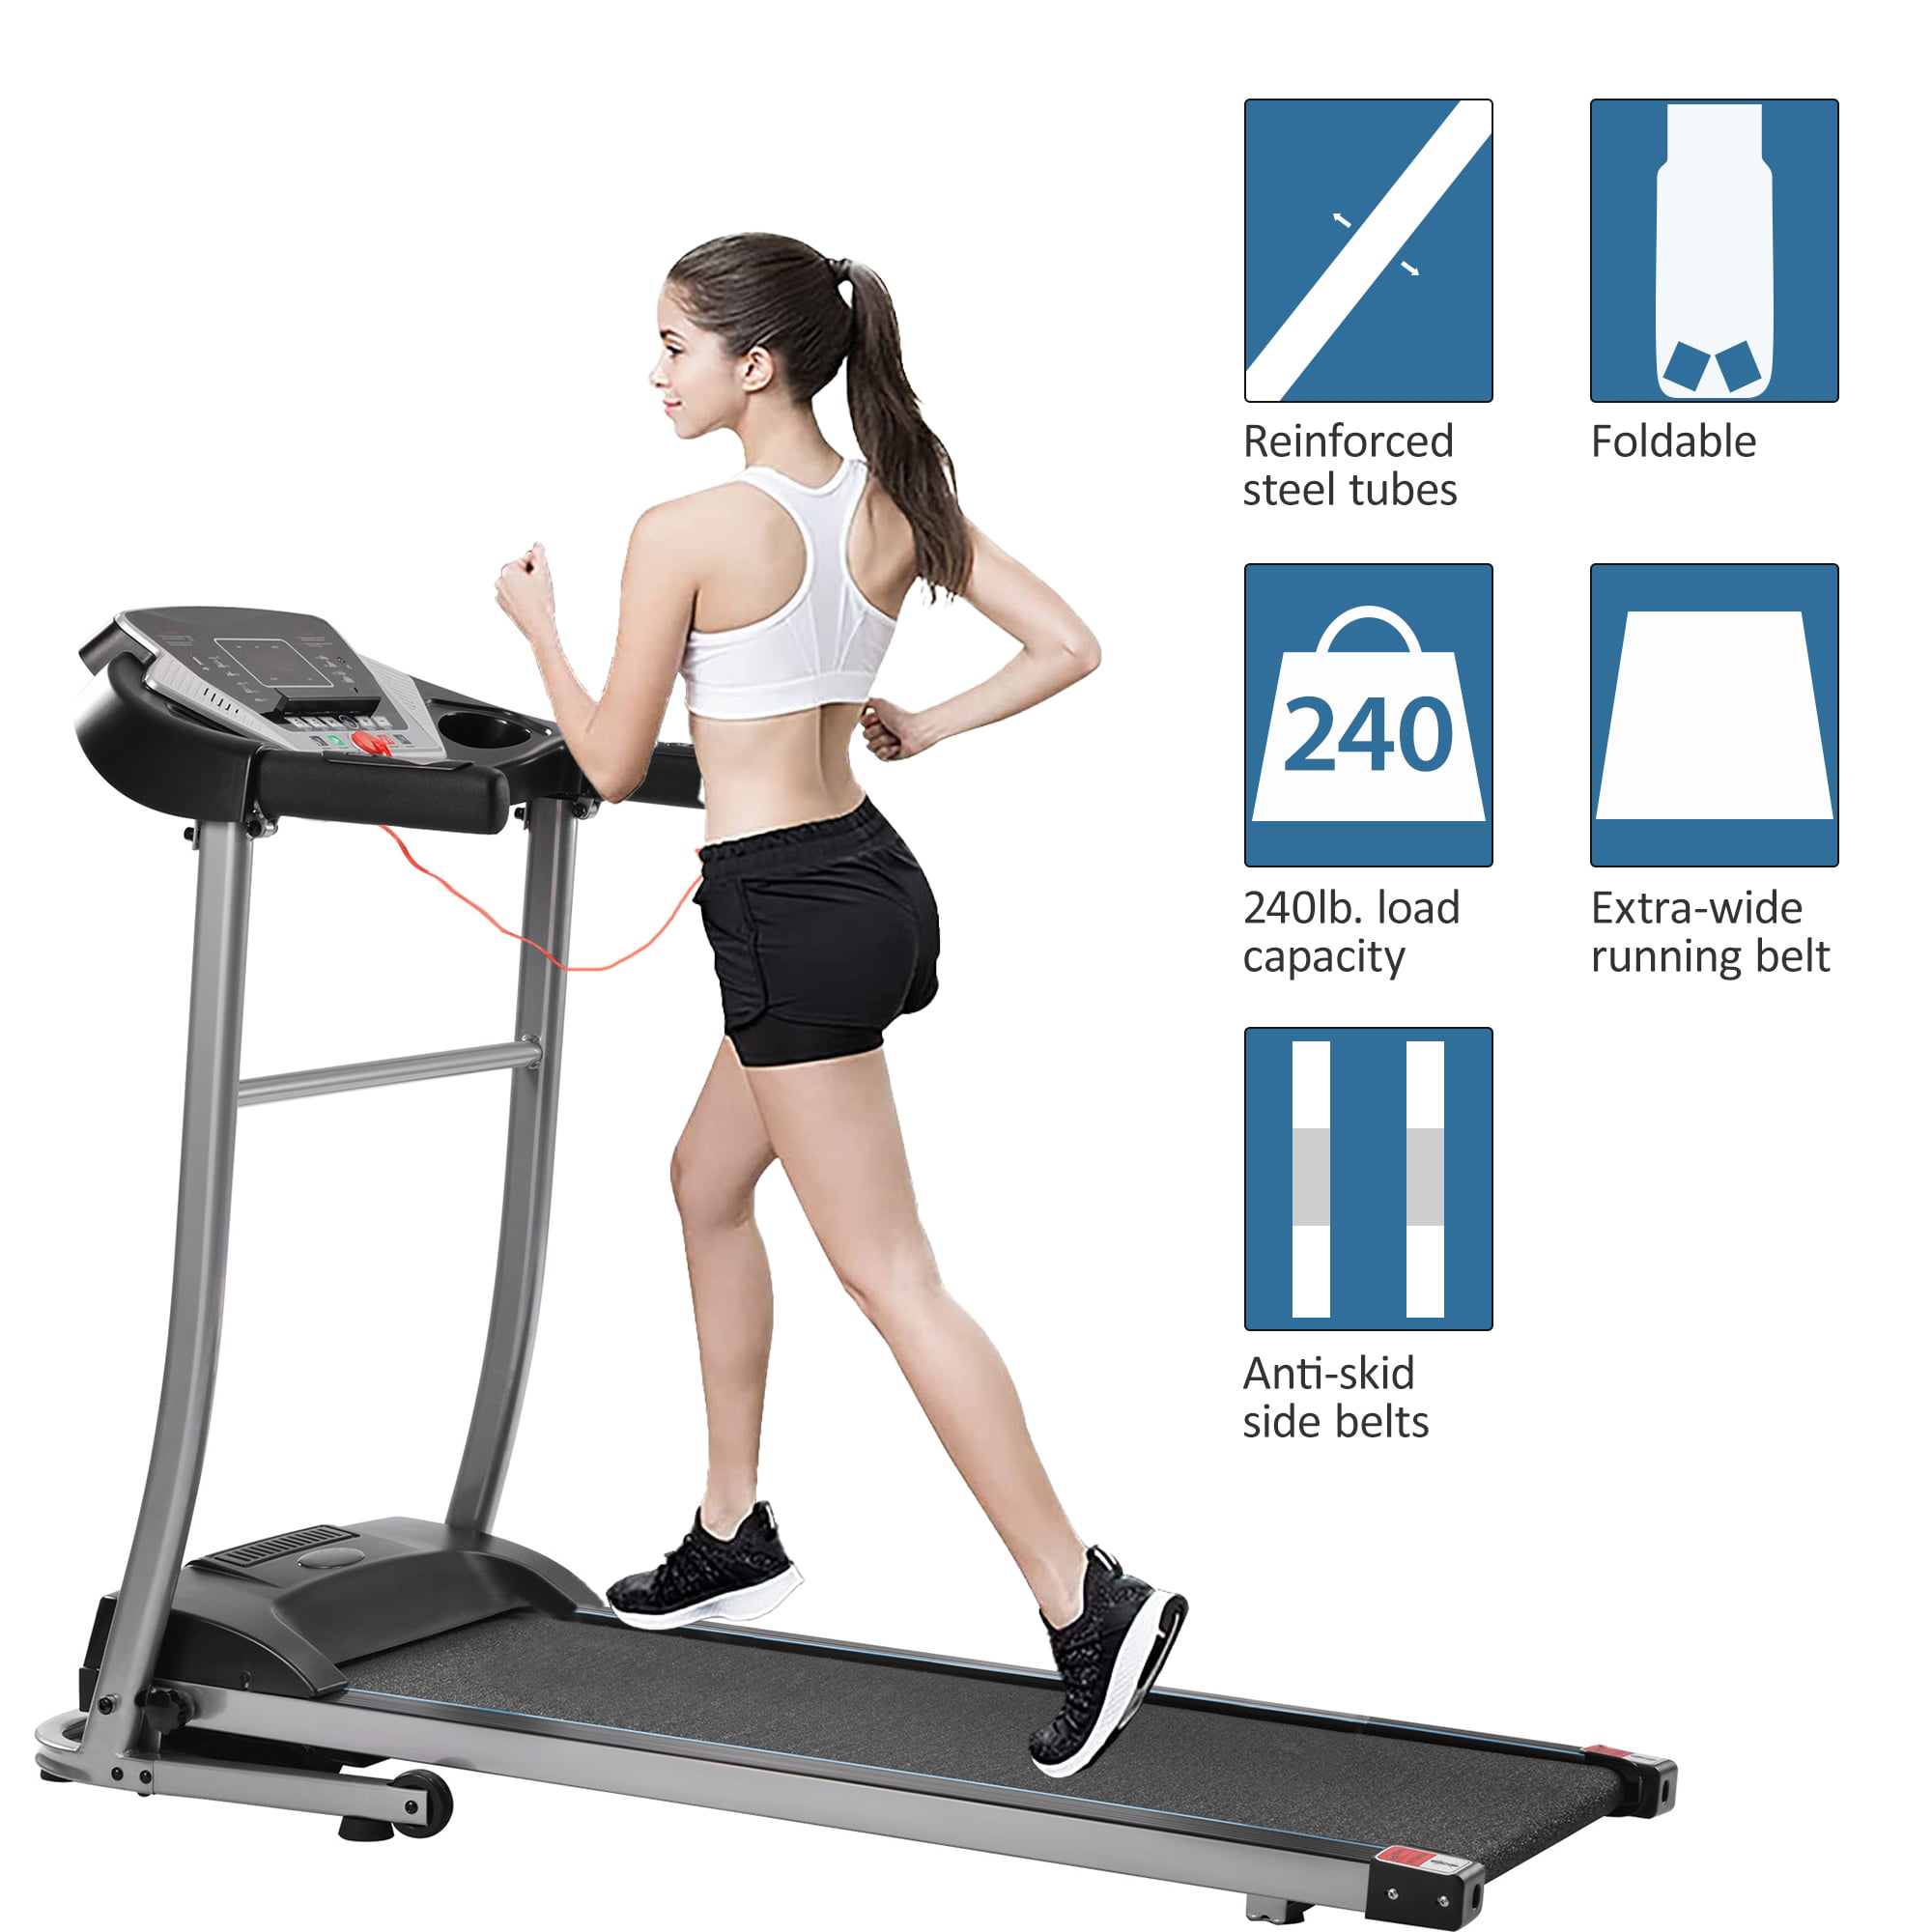 Folding Incline Electric Treadmill Running Motorized Exercise Fitness Machine 